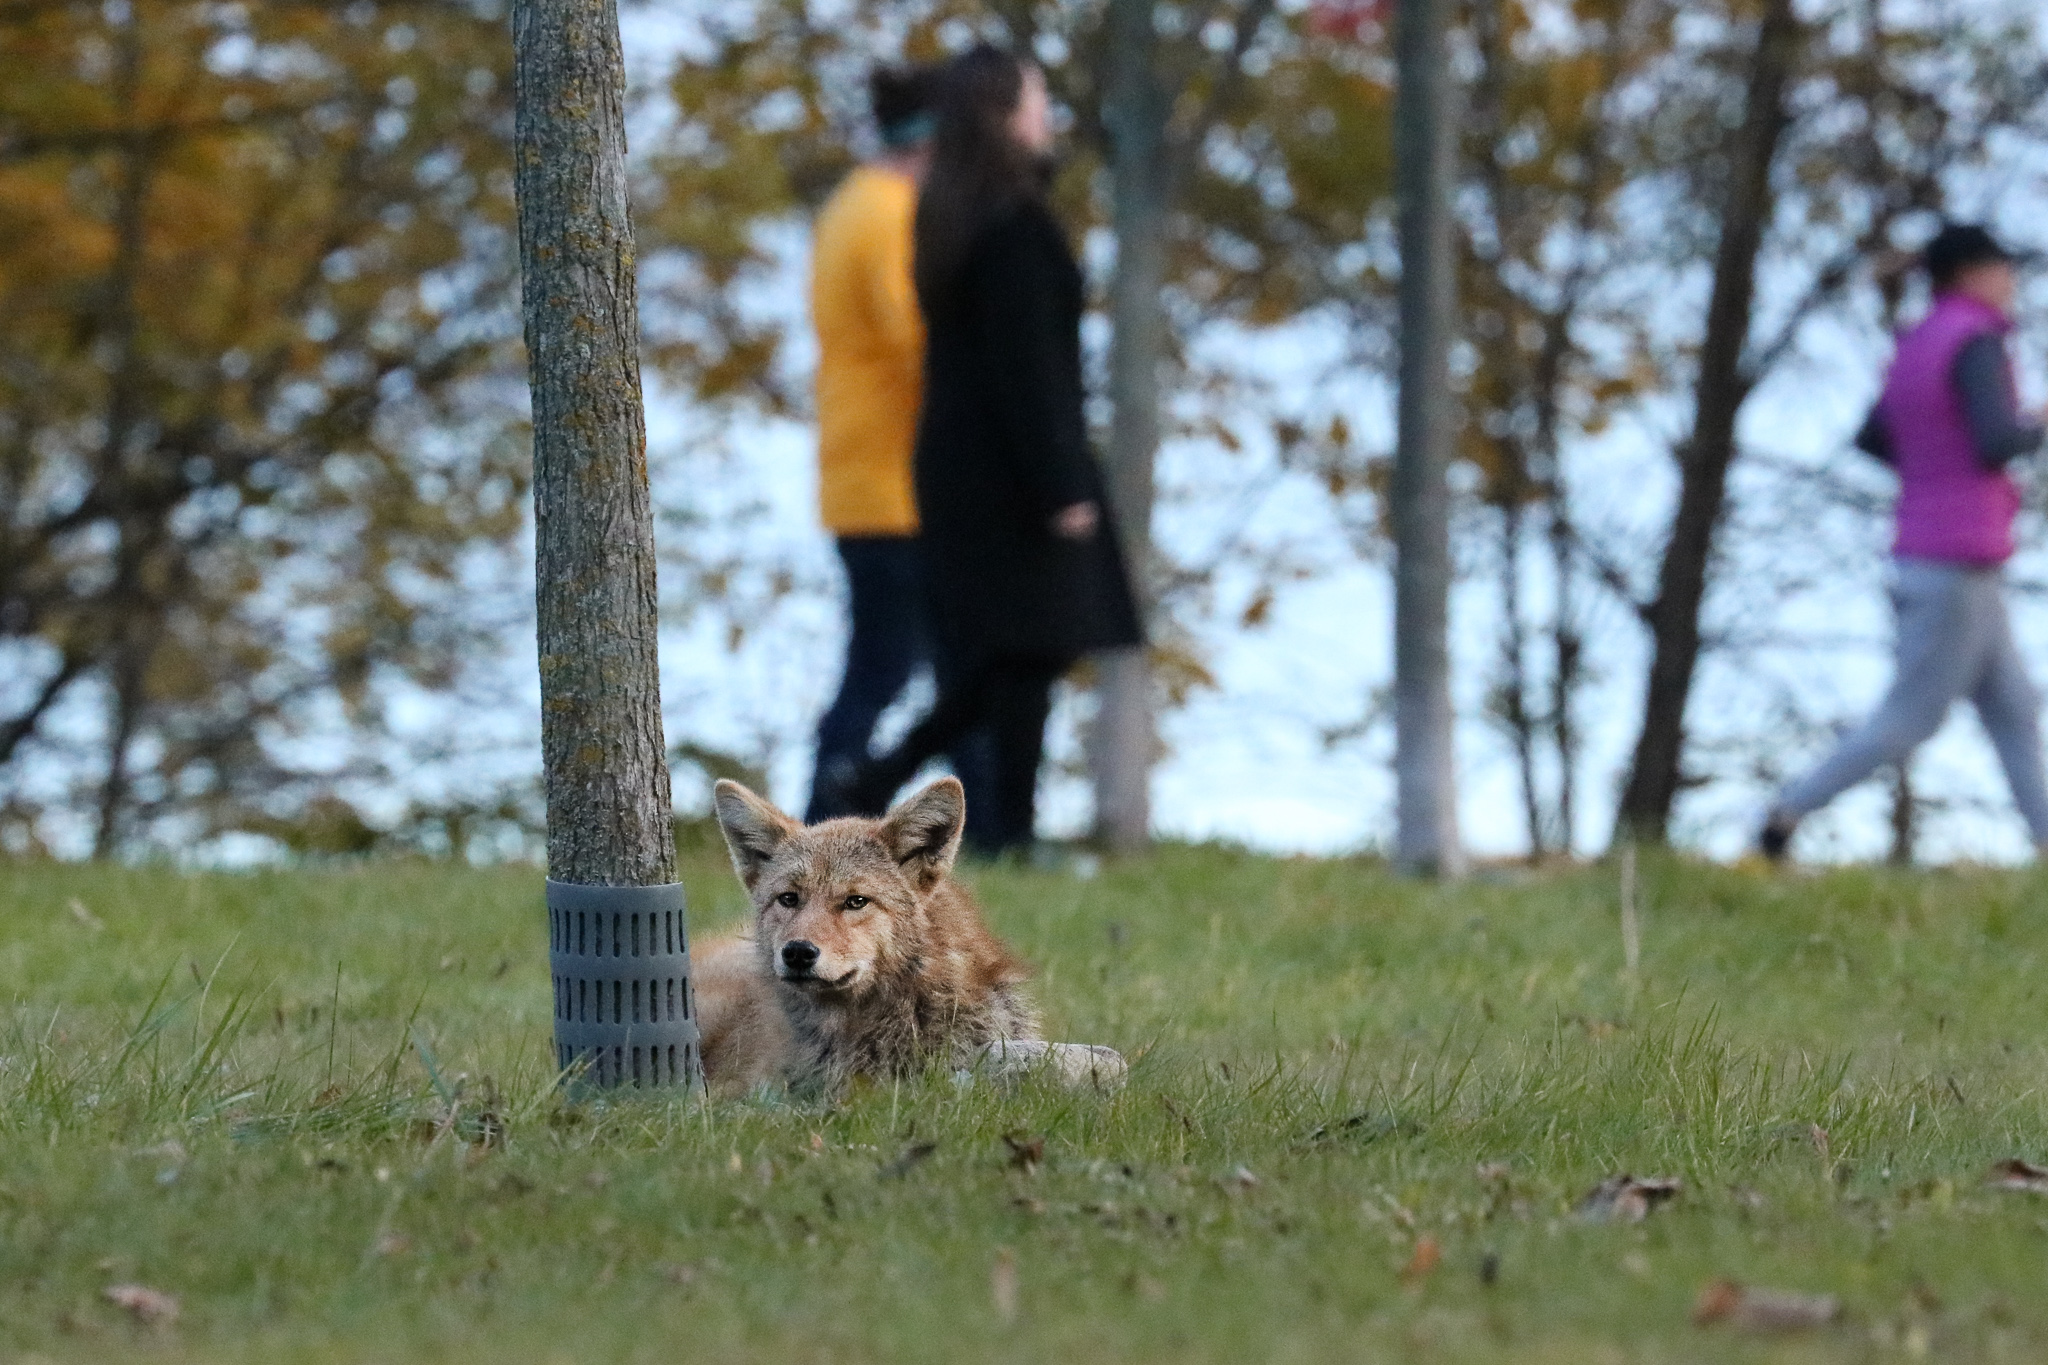 Coyote lies in a field, with people walking along pathway behind it